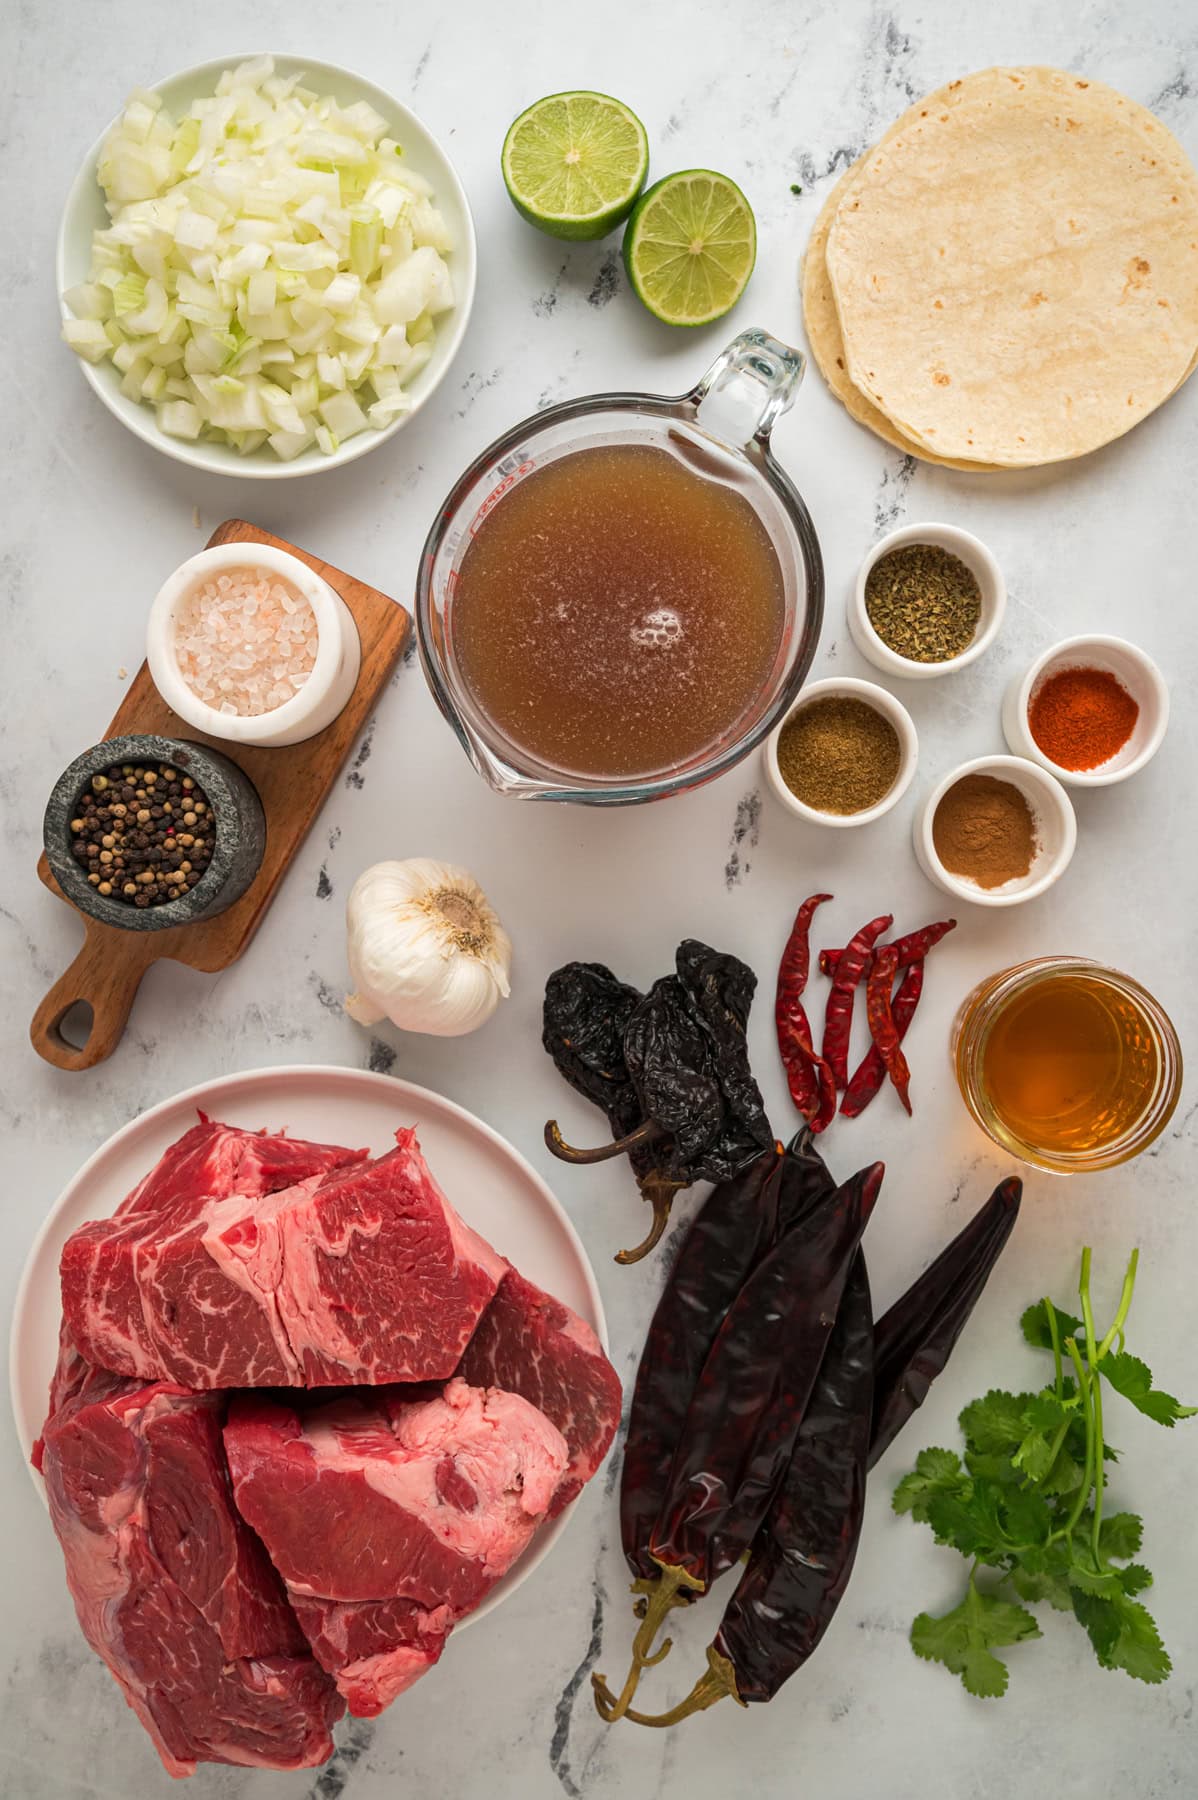 Overhead view of ingredients needed to make birria